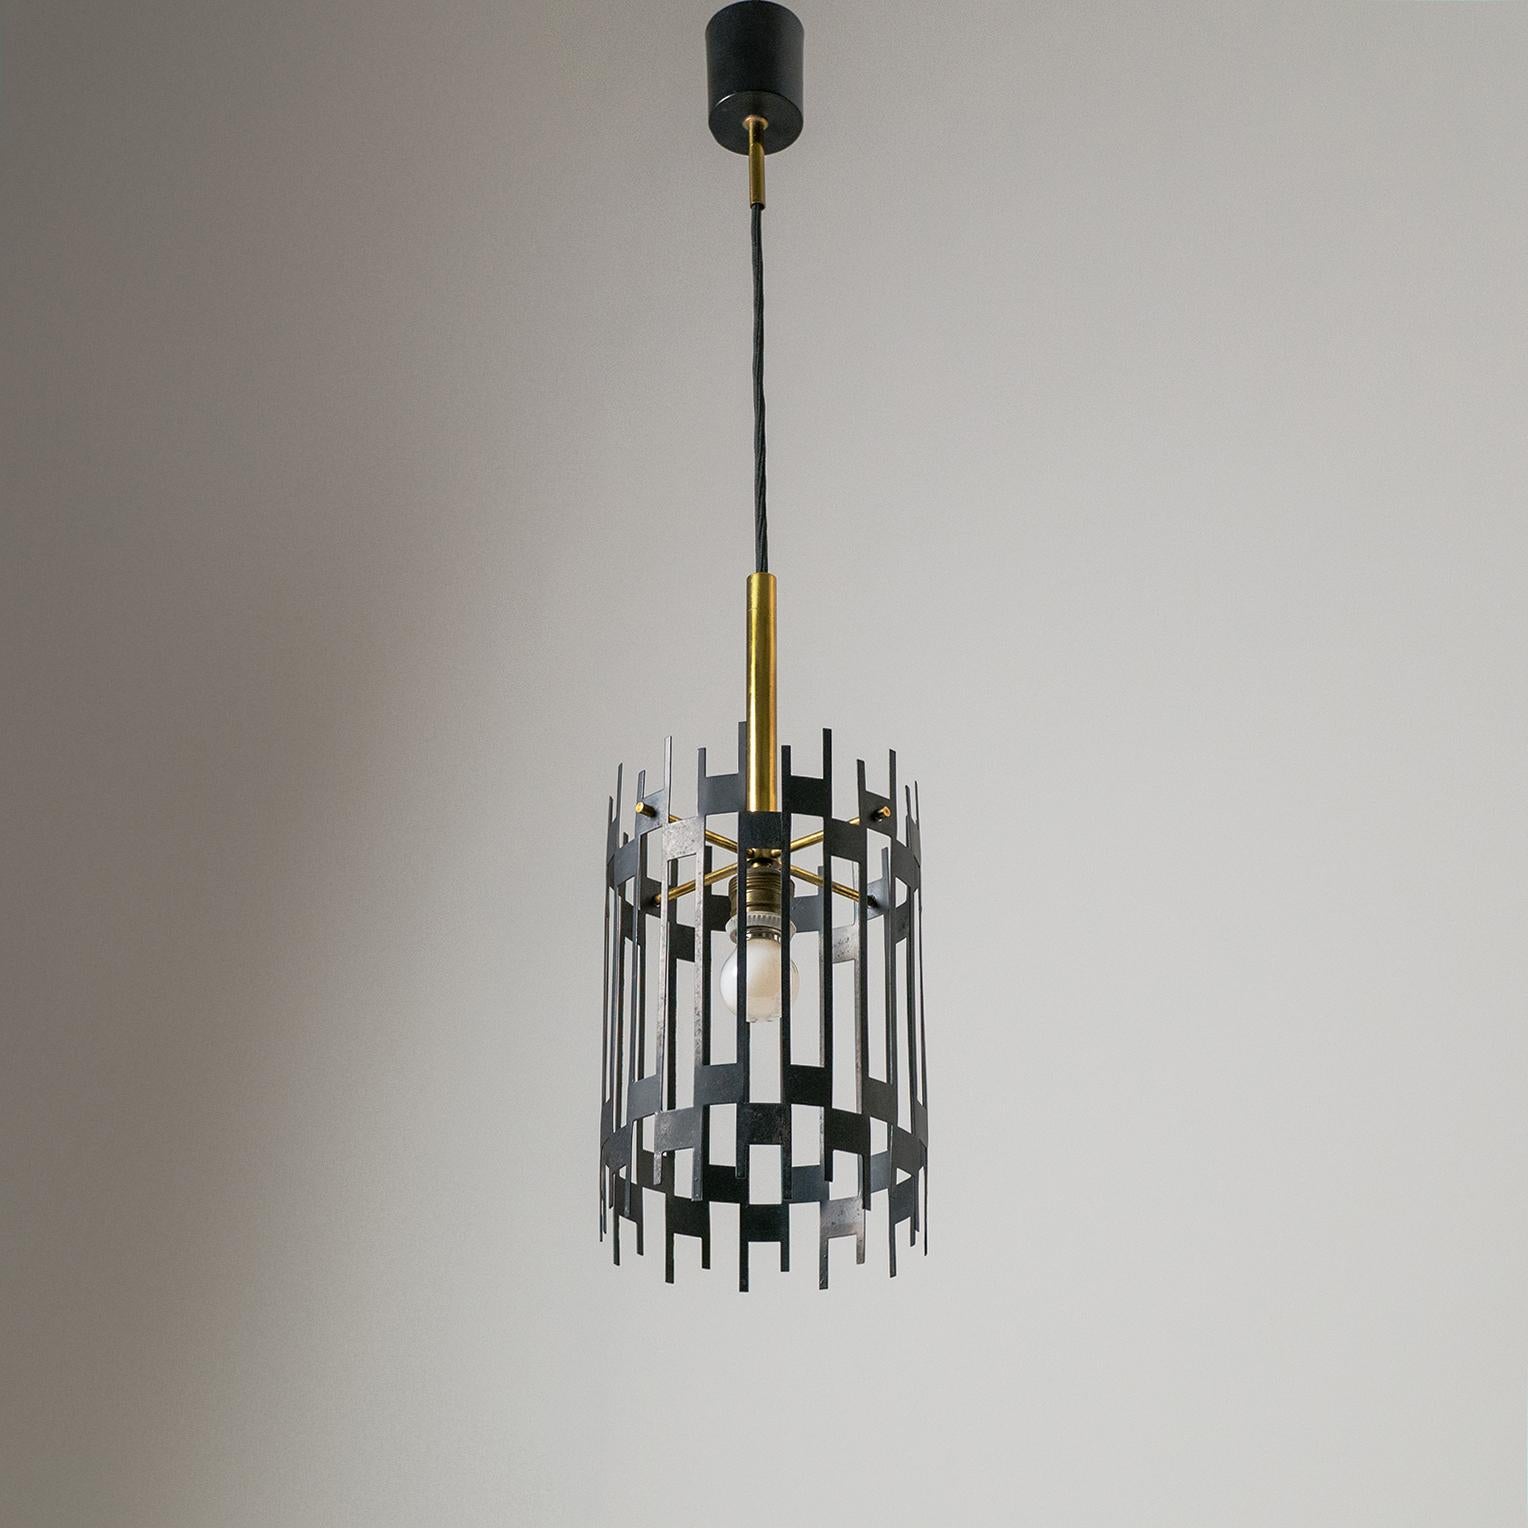 Very unique and rare Italian modernist cage pendant or lantern, 1950s. A geometric graphical black lacquered steel structure is fitted on a minimalist brass support enclosing a single bulb. Nice original vintage condition with some patina to the